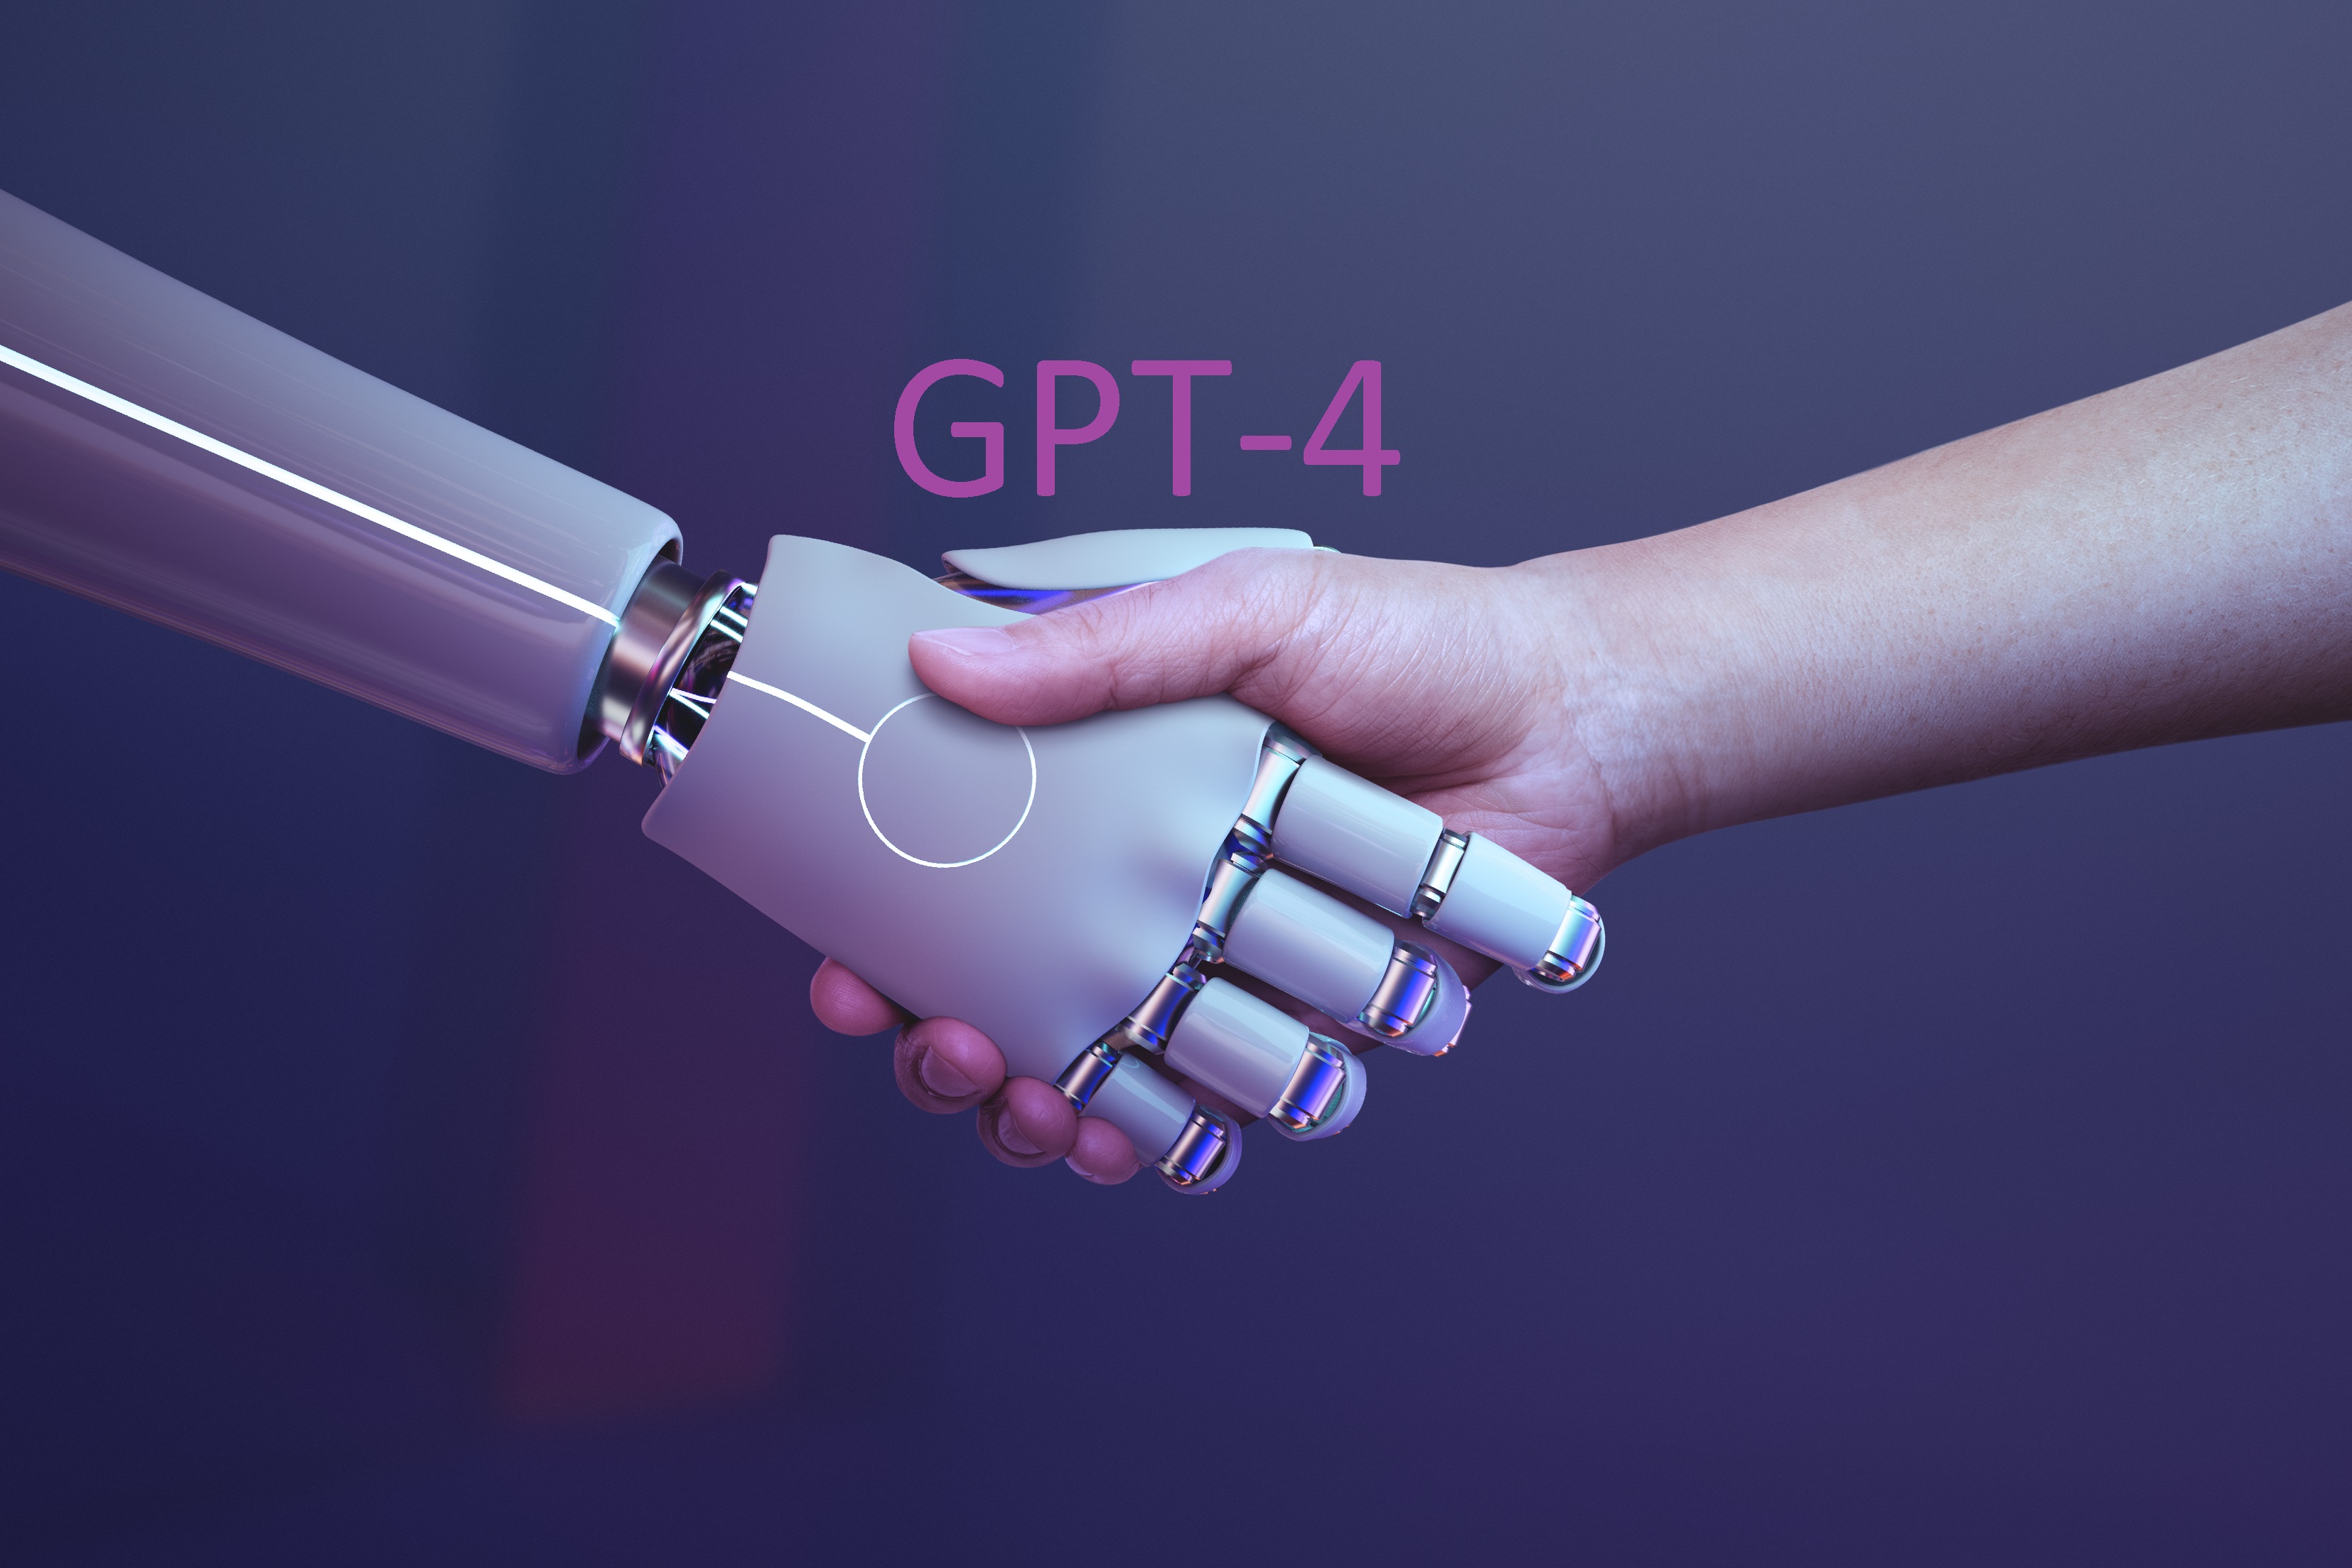 What is the difference between GPT-3 and GPT-4